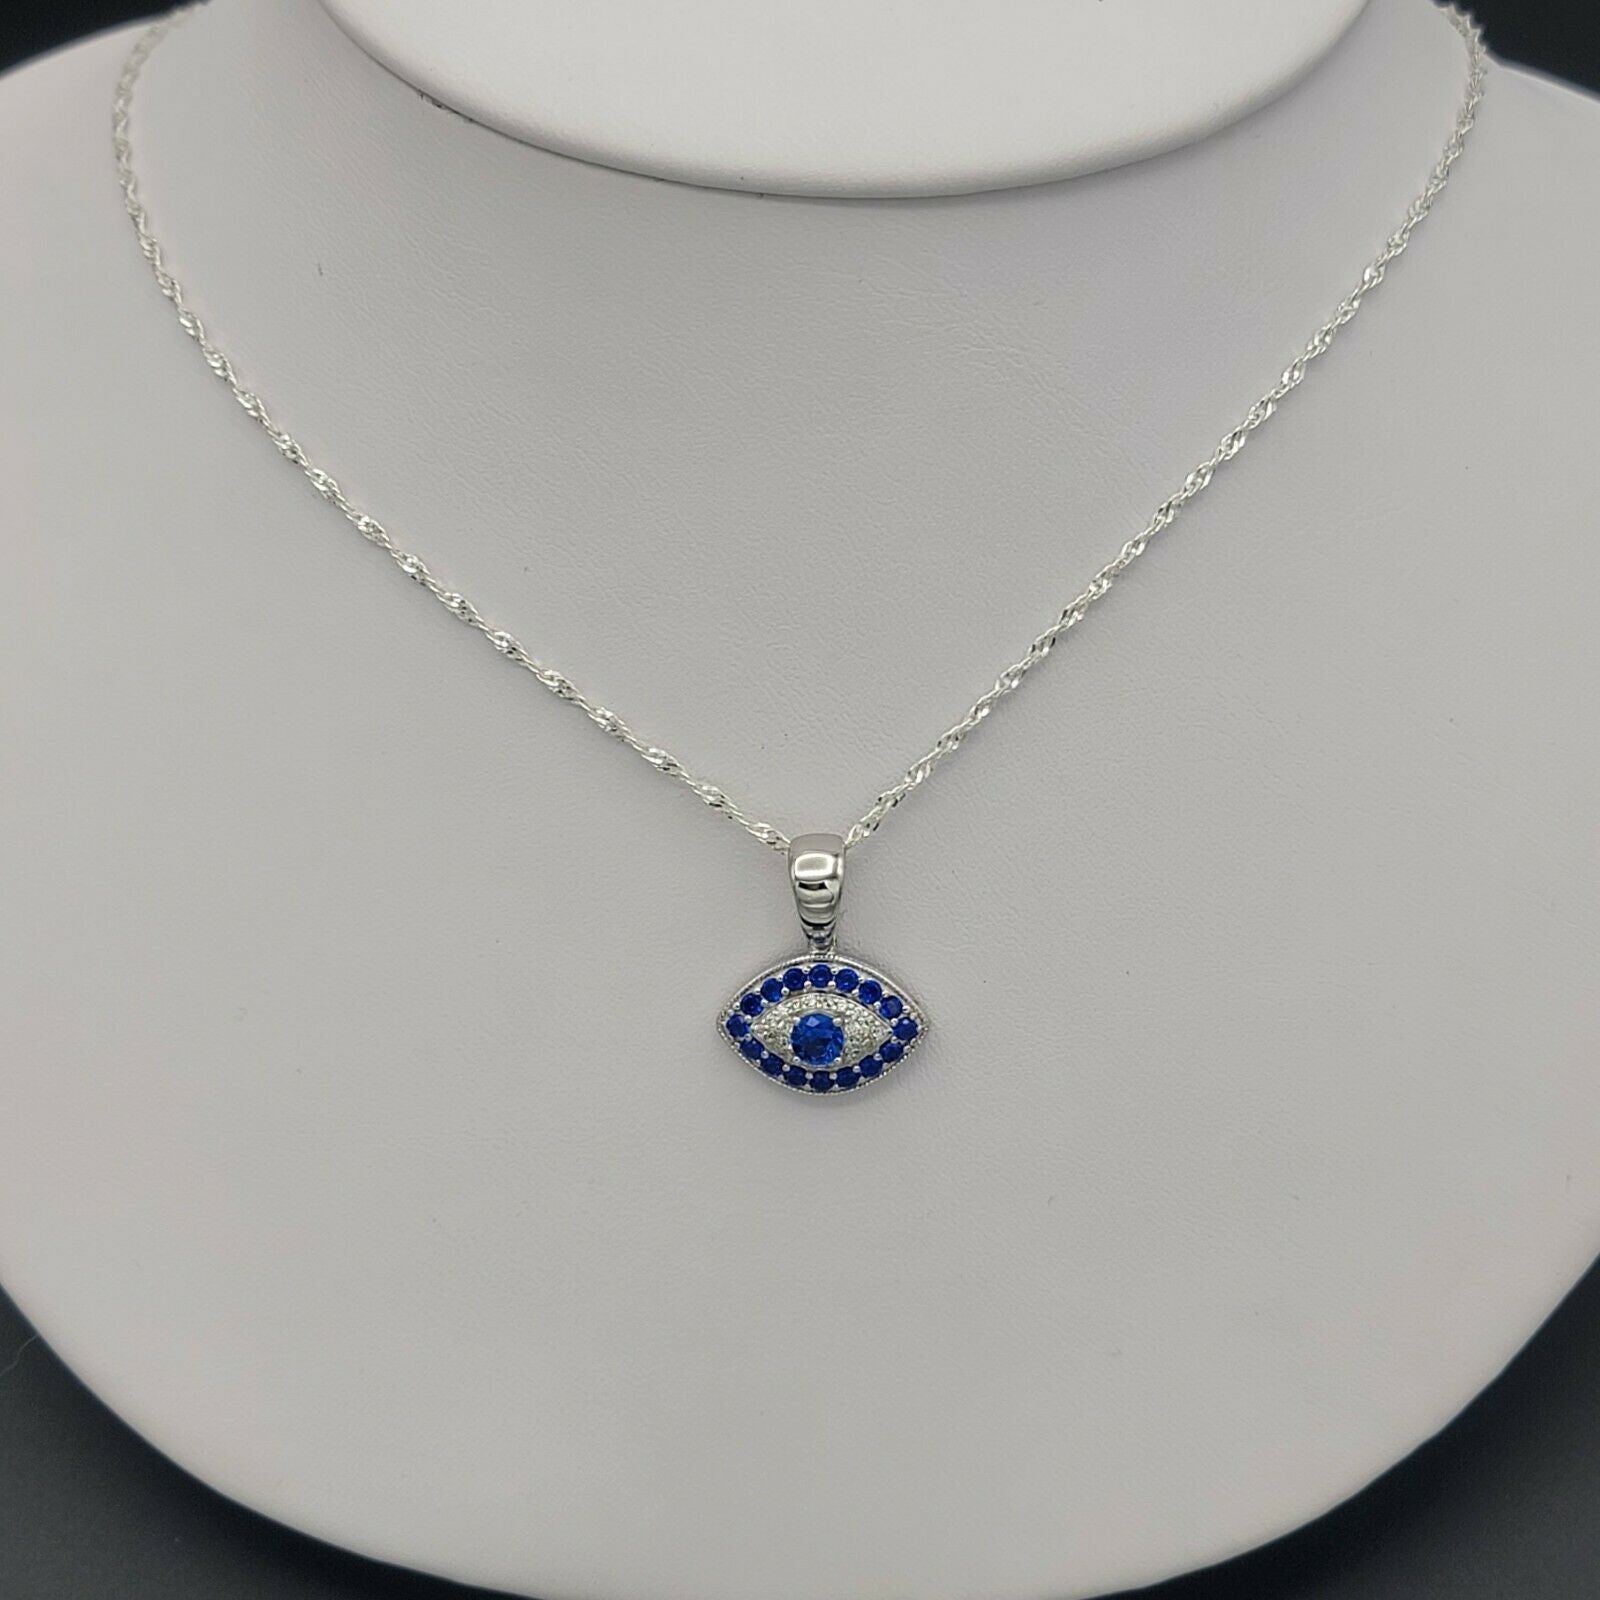 Blue Evil Eye Pendant Chain Necklace. 925 Sterling Silver.gold